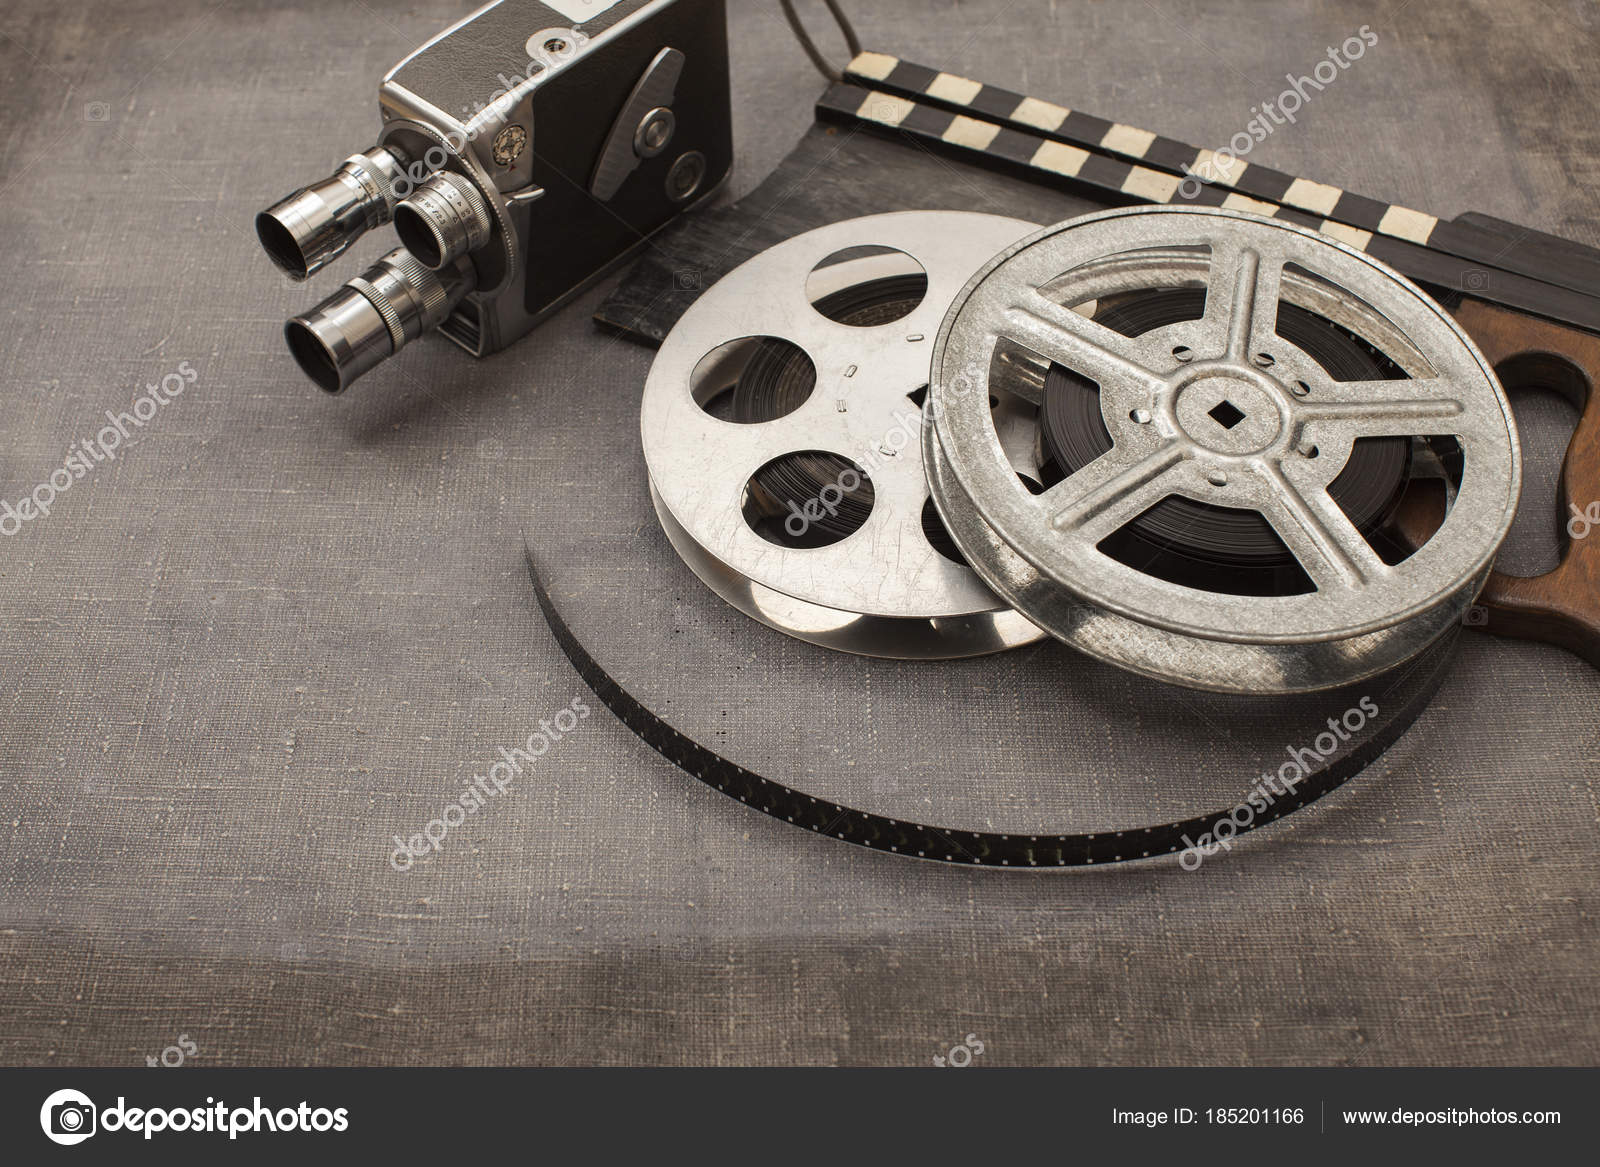 Old movie camera, film reels and clapperboards — Stock Photo © spartakas1  #185201166